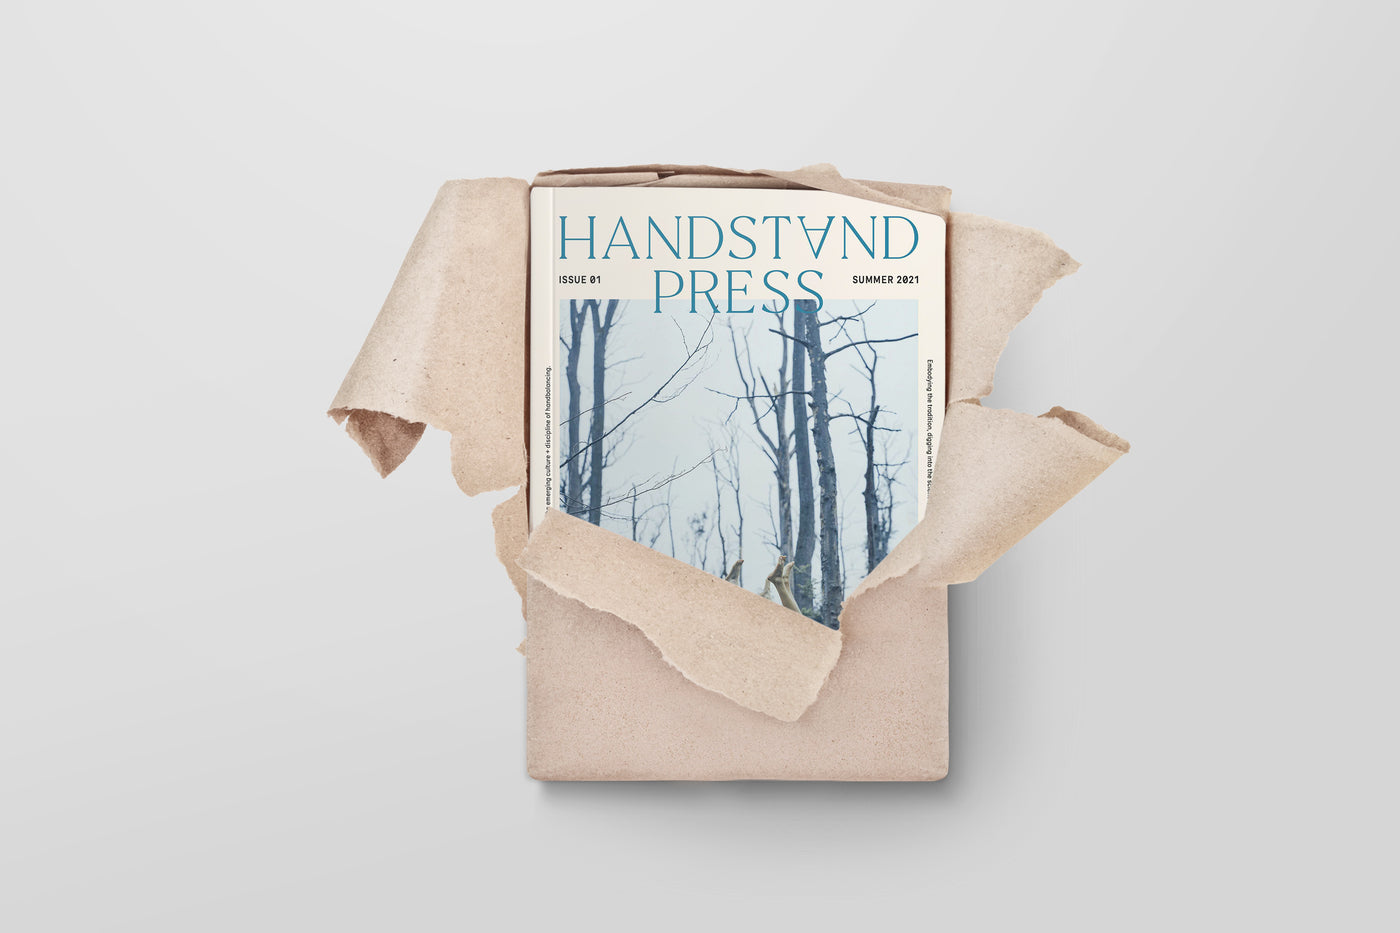 First issue of The Handstand Press magazine being opened.